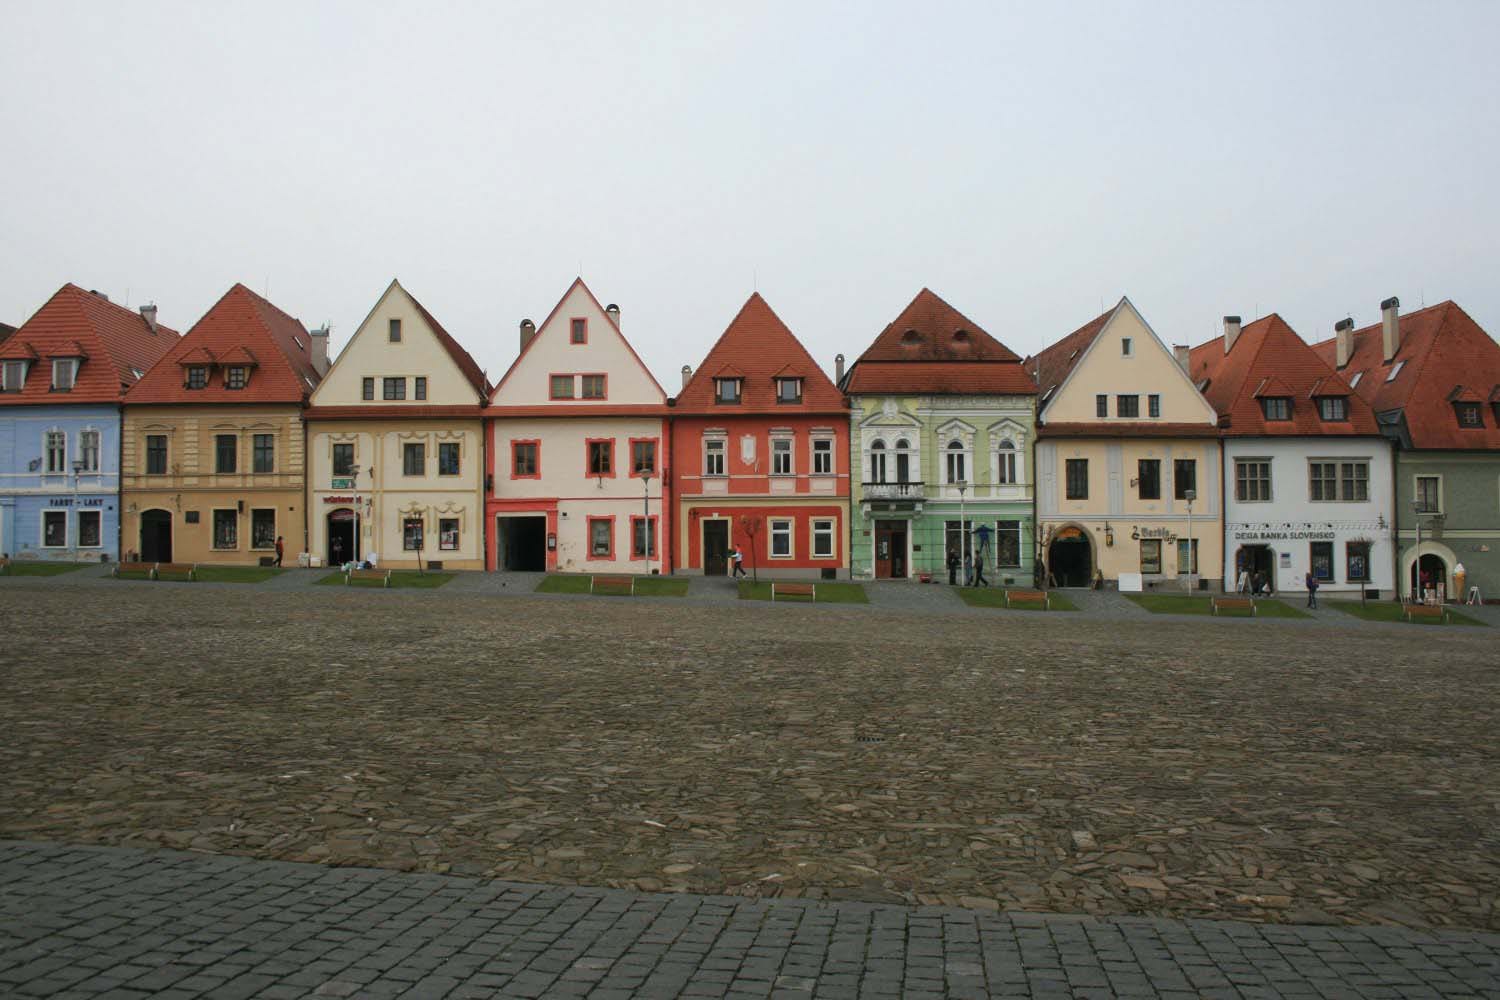 Bardejov square houses in a rows